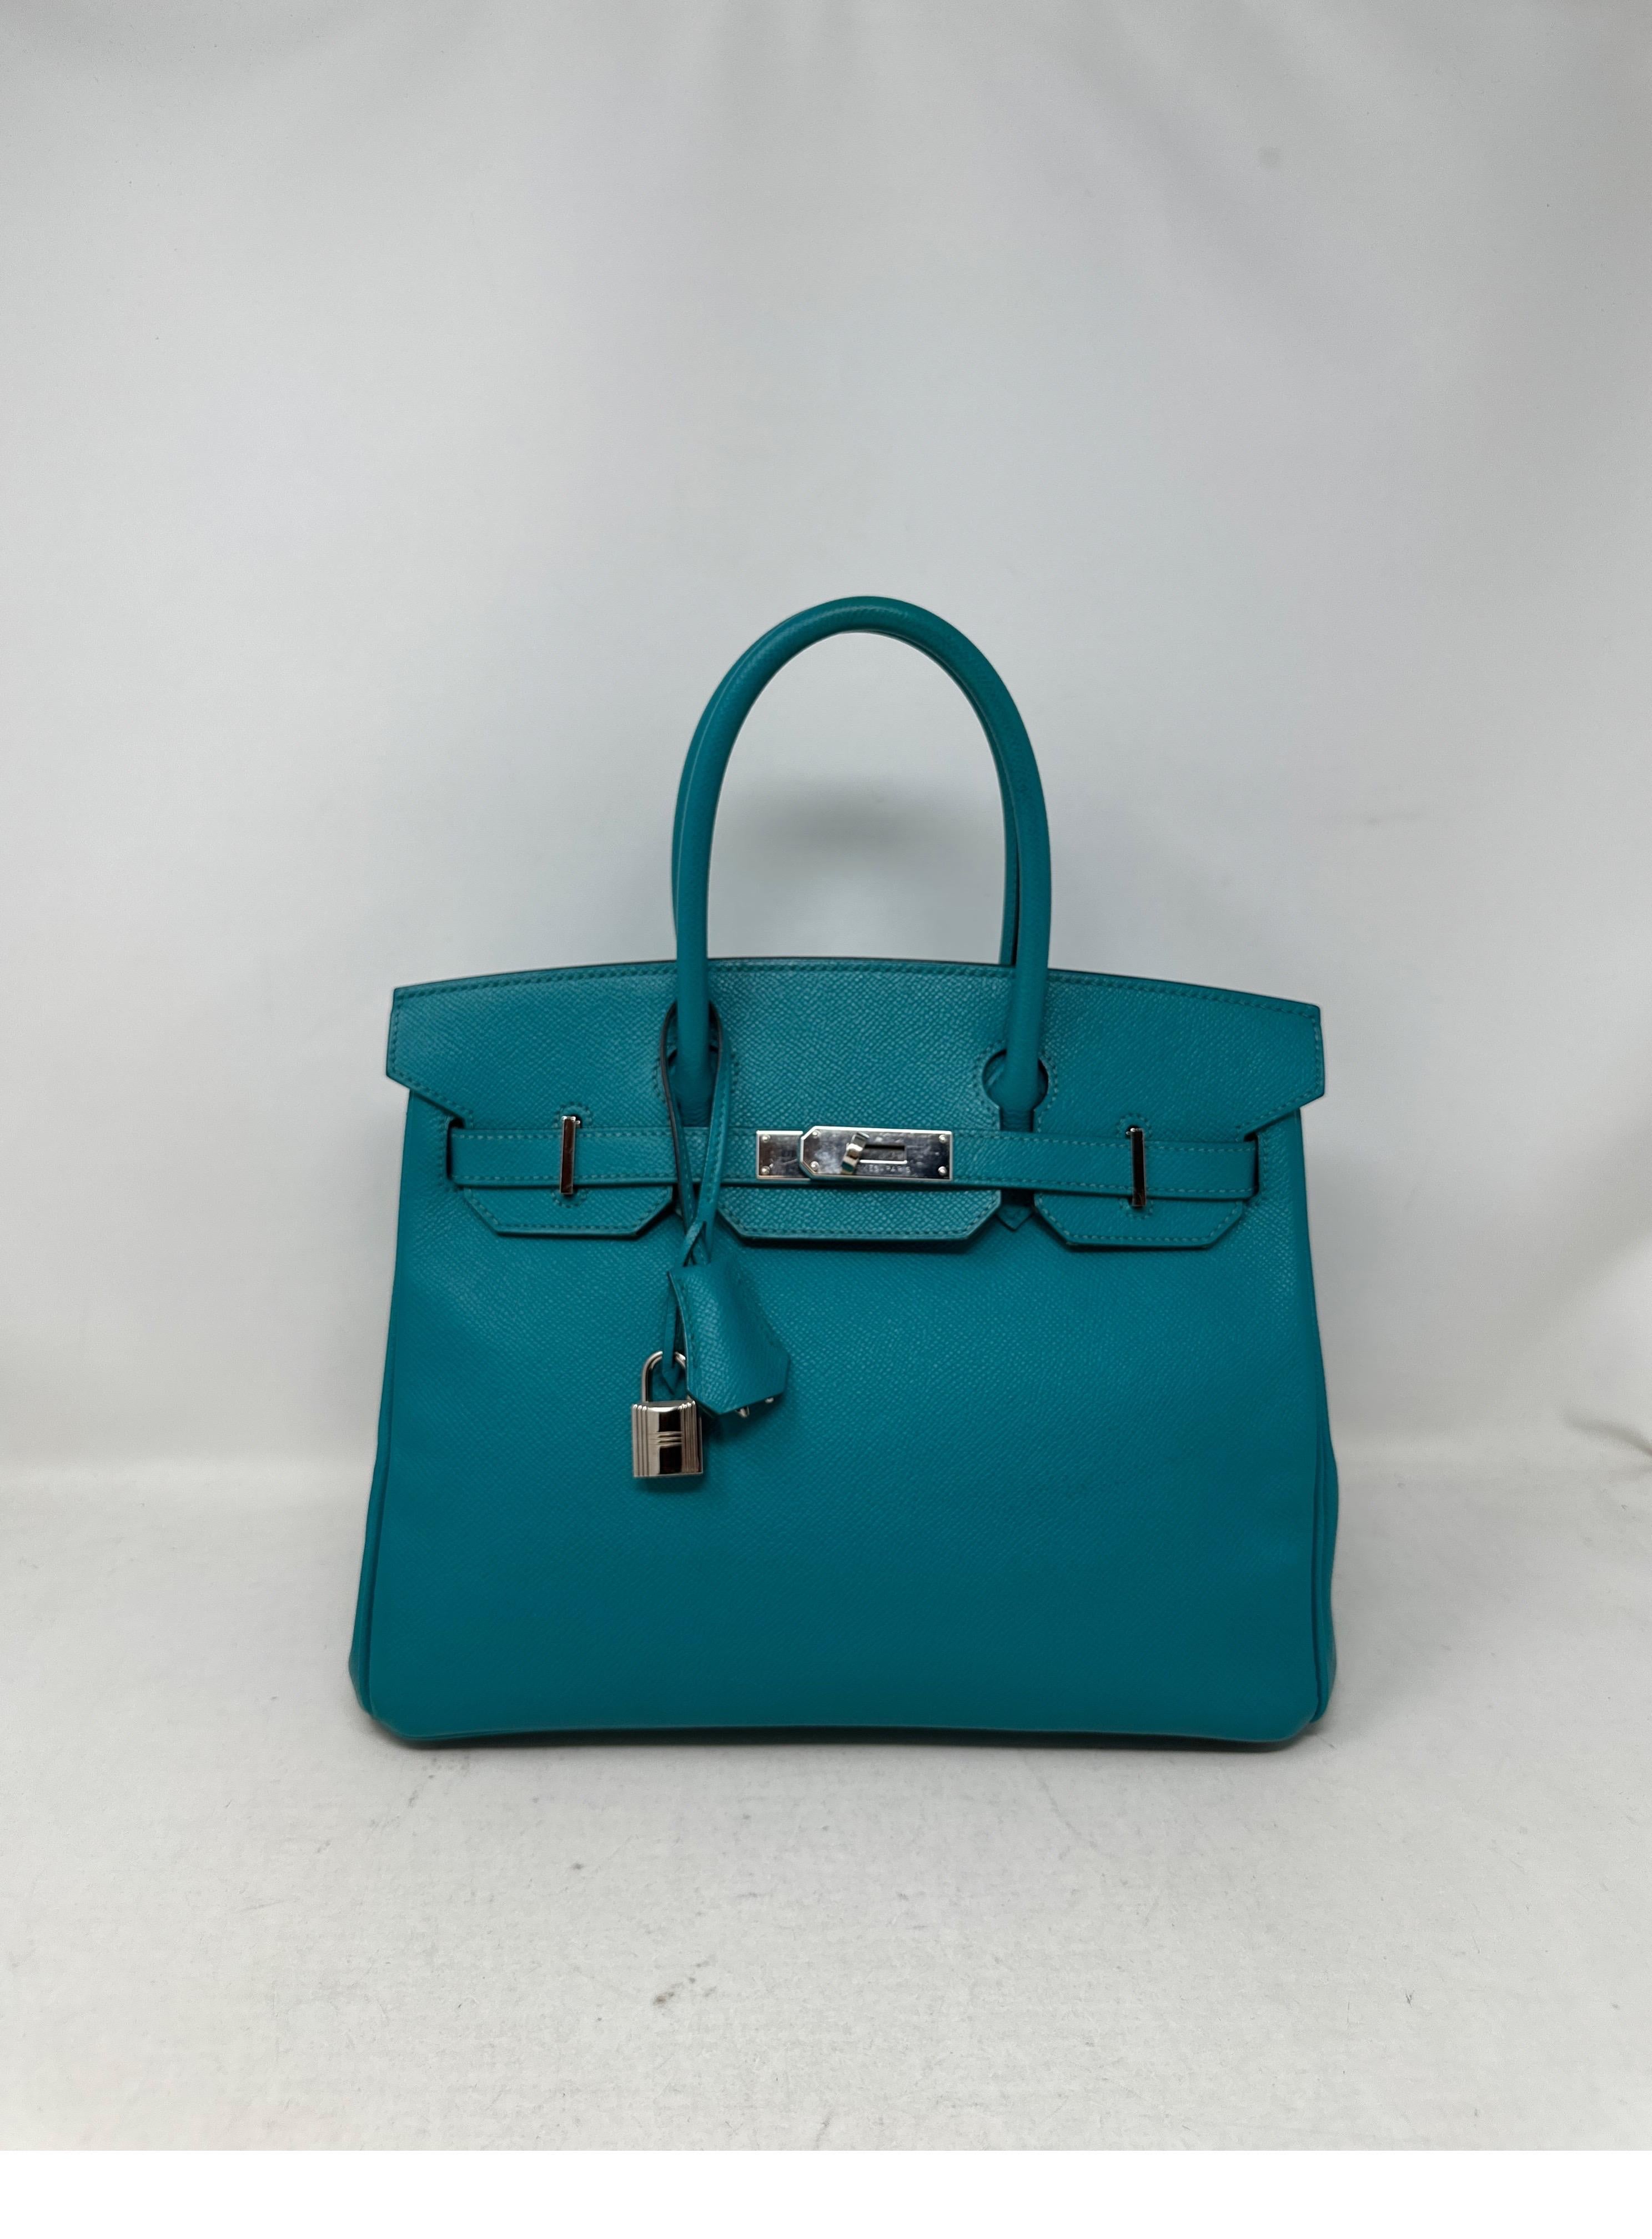 Hermes Blue Paon Birkin 30 Bag. Excellent condition. Epsom leather. Interior is clean. Palladium silver hardware. Plastic is still on hardware. Looks like new. Rare blue color. Most wanted size. Includes clochette, lock, keys, and dust bag.